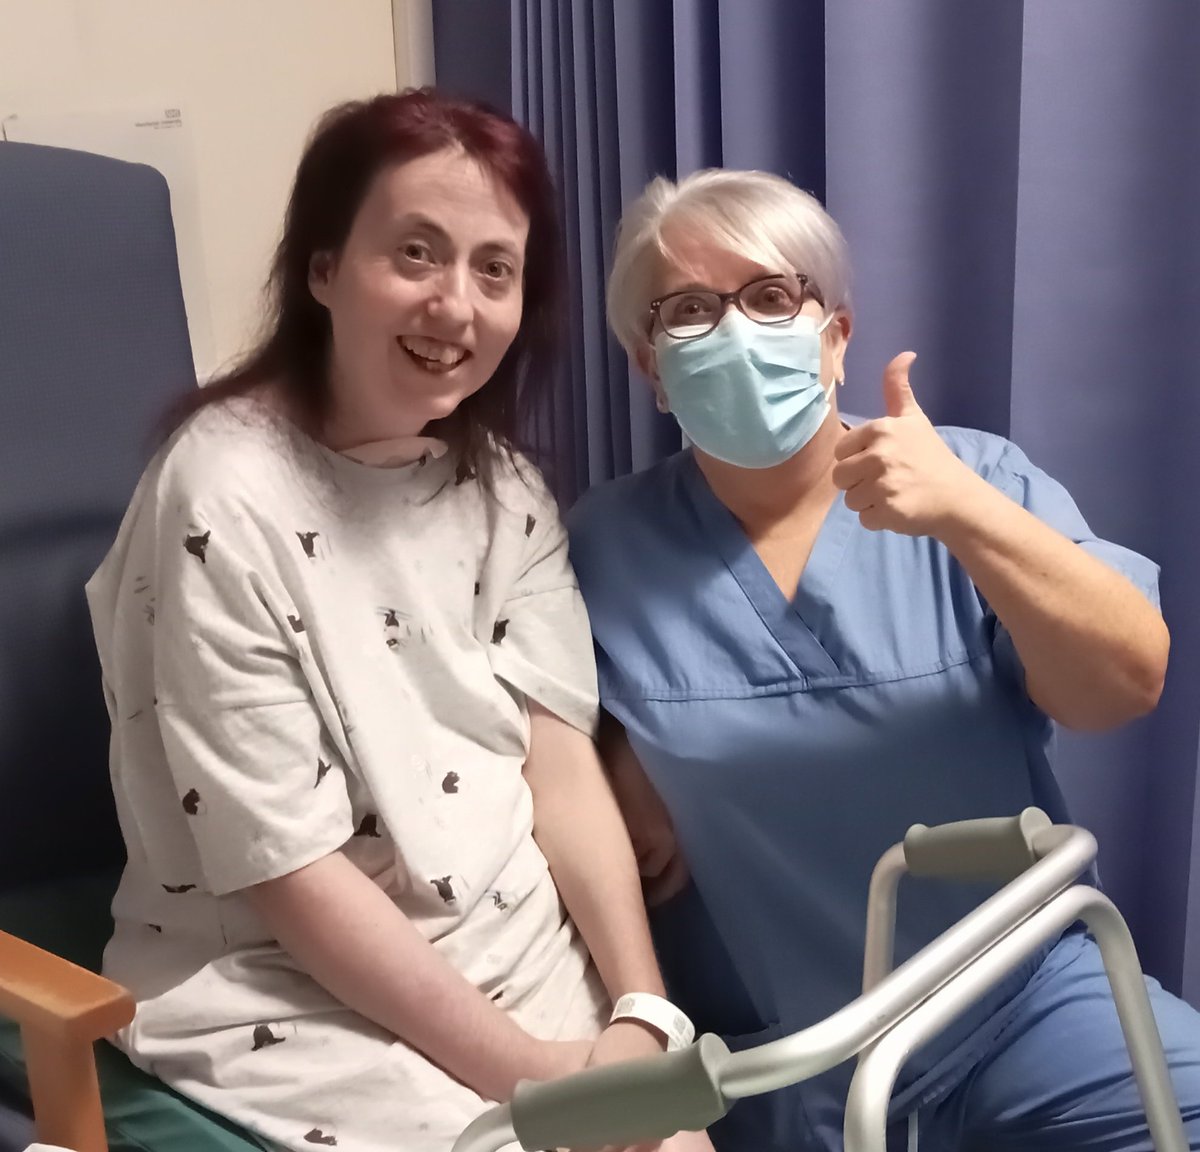 One of our long stay #rehablegend finally went to the ward after 3.5 months on ICU. Very pleased to visit her today 🎉 A real MDT effort - medical team, excellent nursing care (including hair dye & weekly manicure!), physio, dietician, SLT, pharmacy & special help from NWVU 👏👏